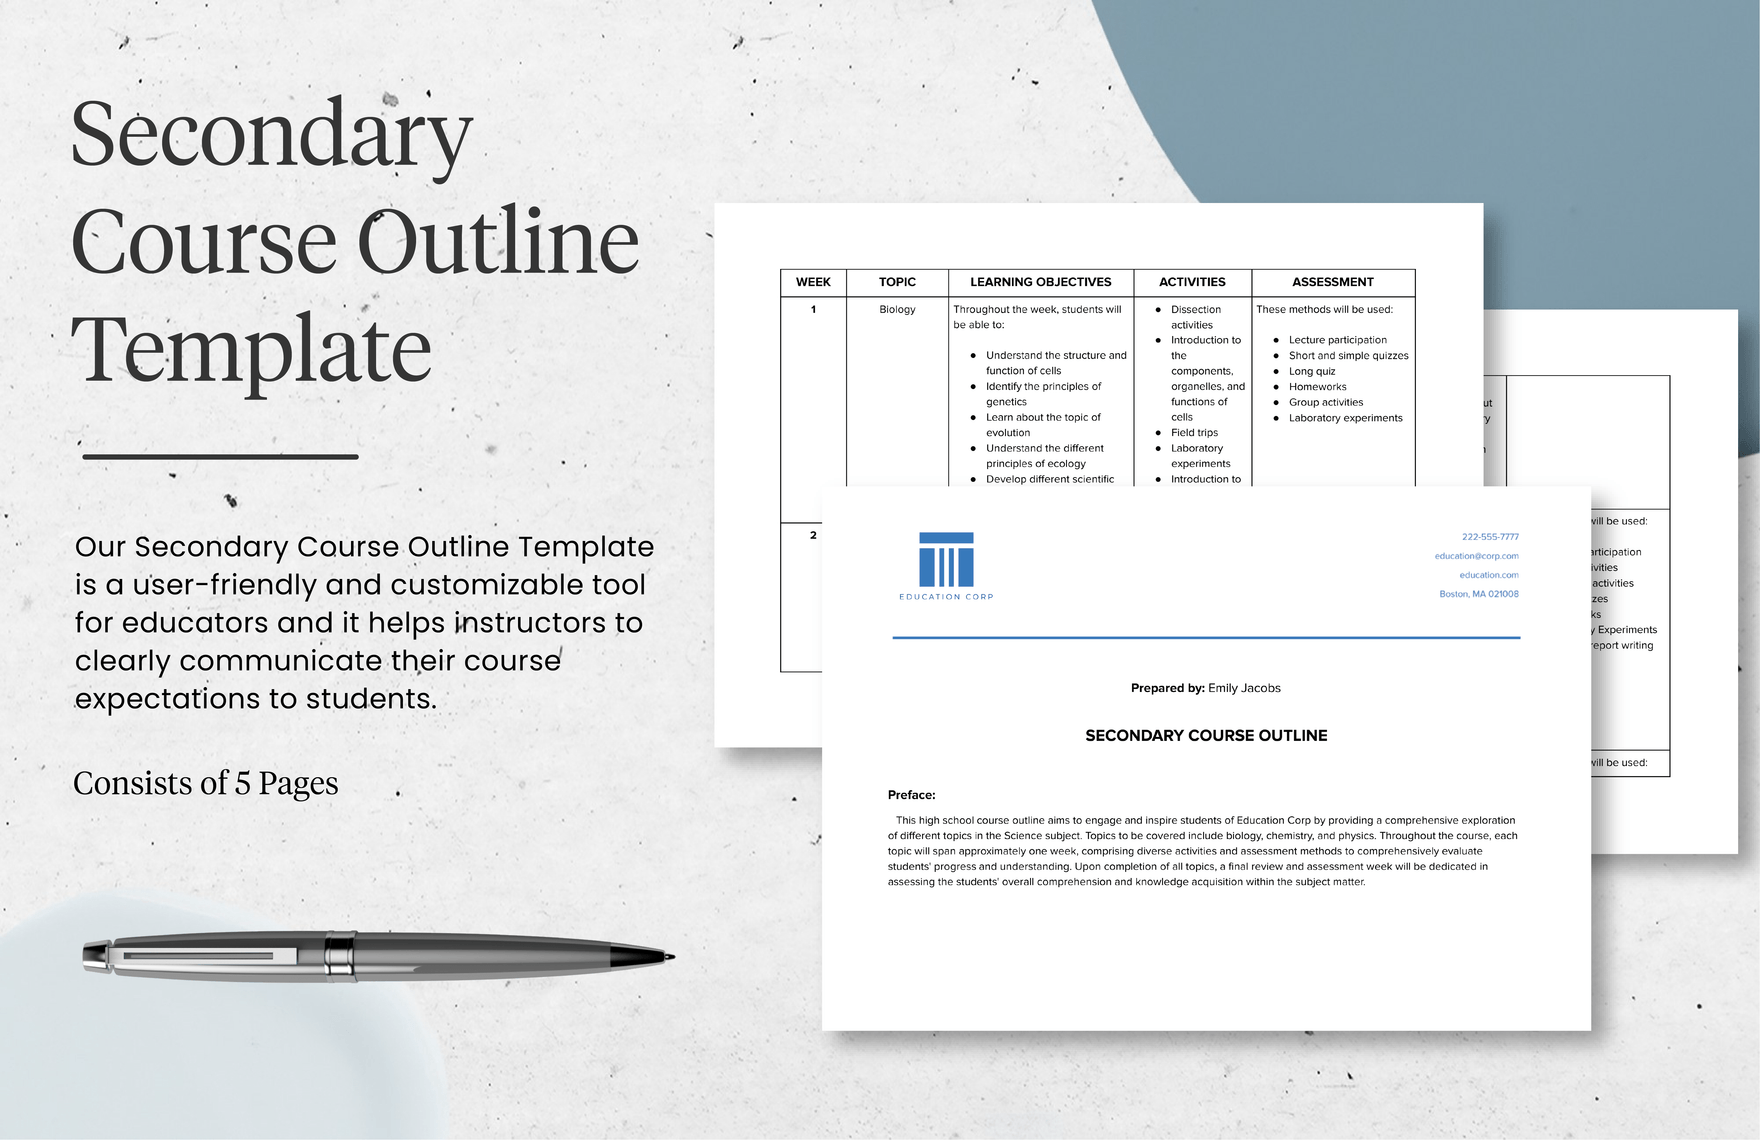 Secondary Course Outline Template in Word, Google Docs